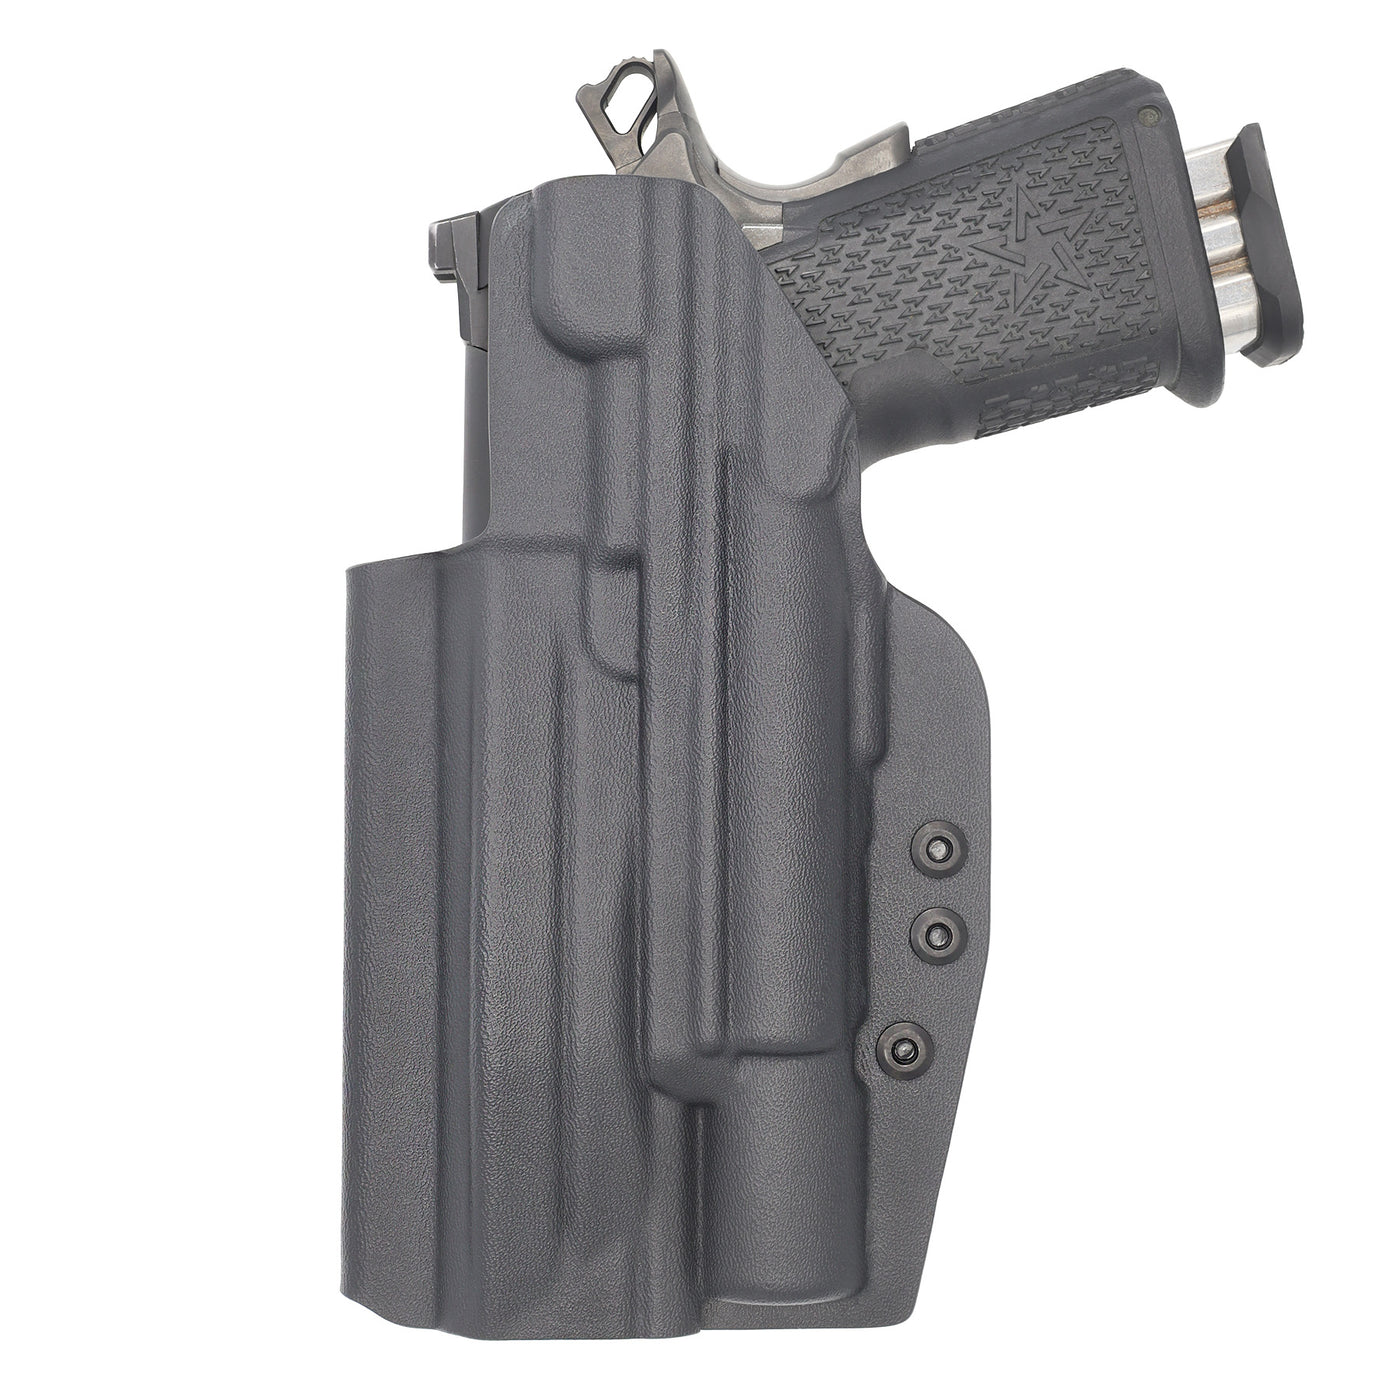 C&G Holsters Quickship IWB Tactical 1911/2011 Surefire X300 in holstered position back view